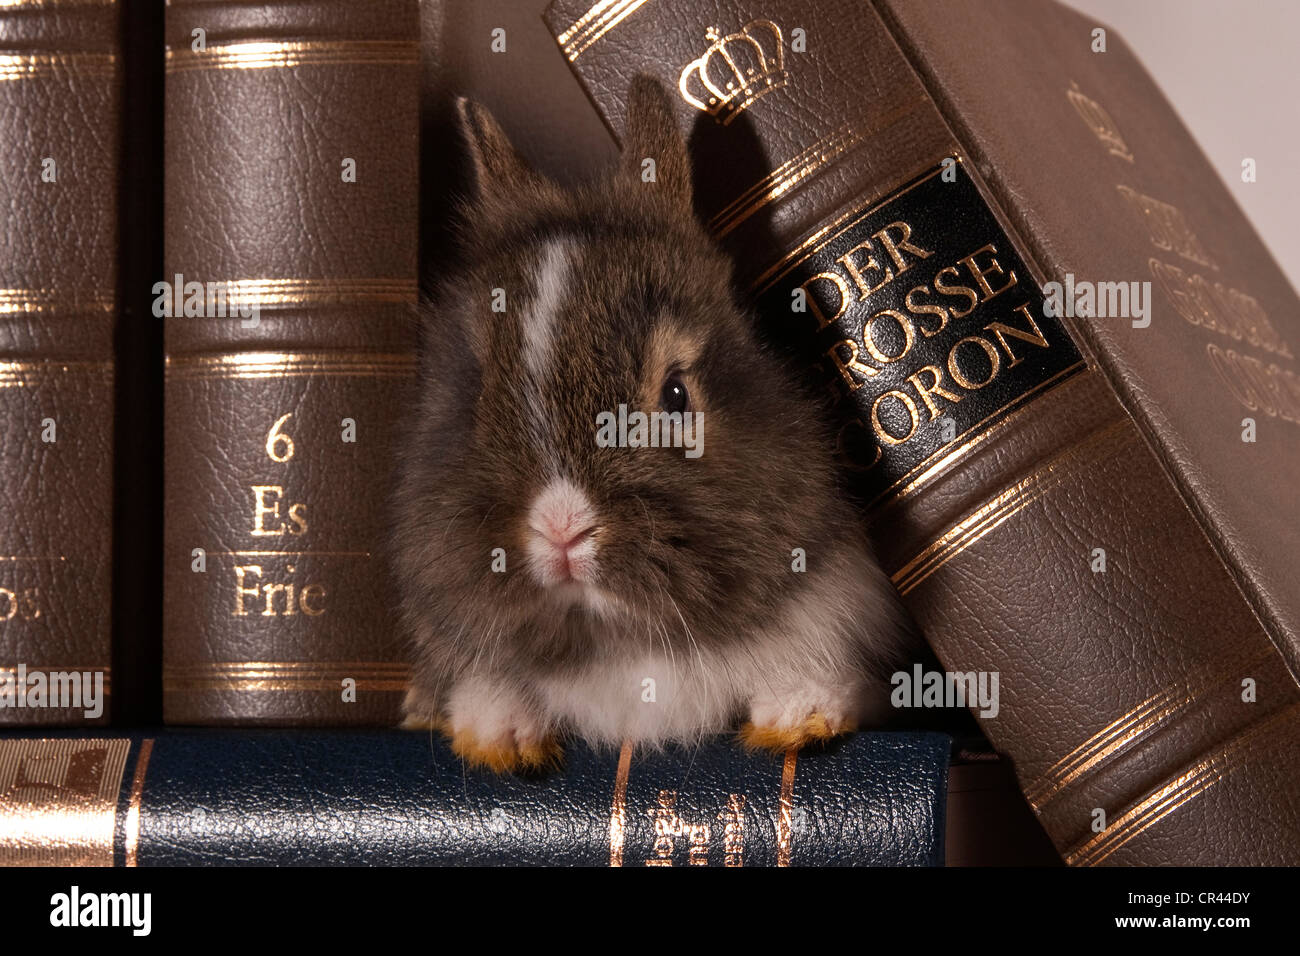 Young dwarf rabbit between leather-bound volumes Stock Photo